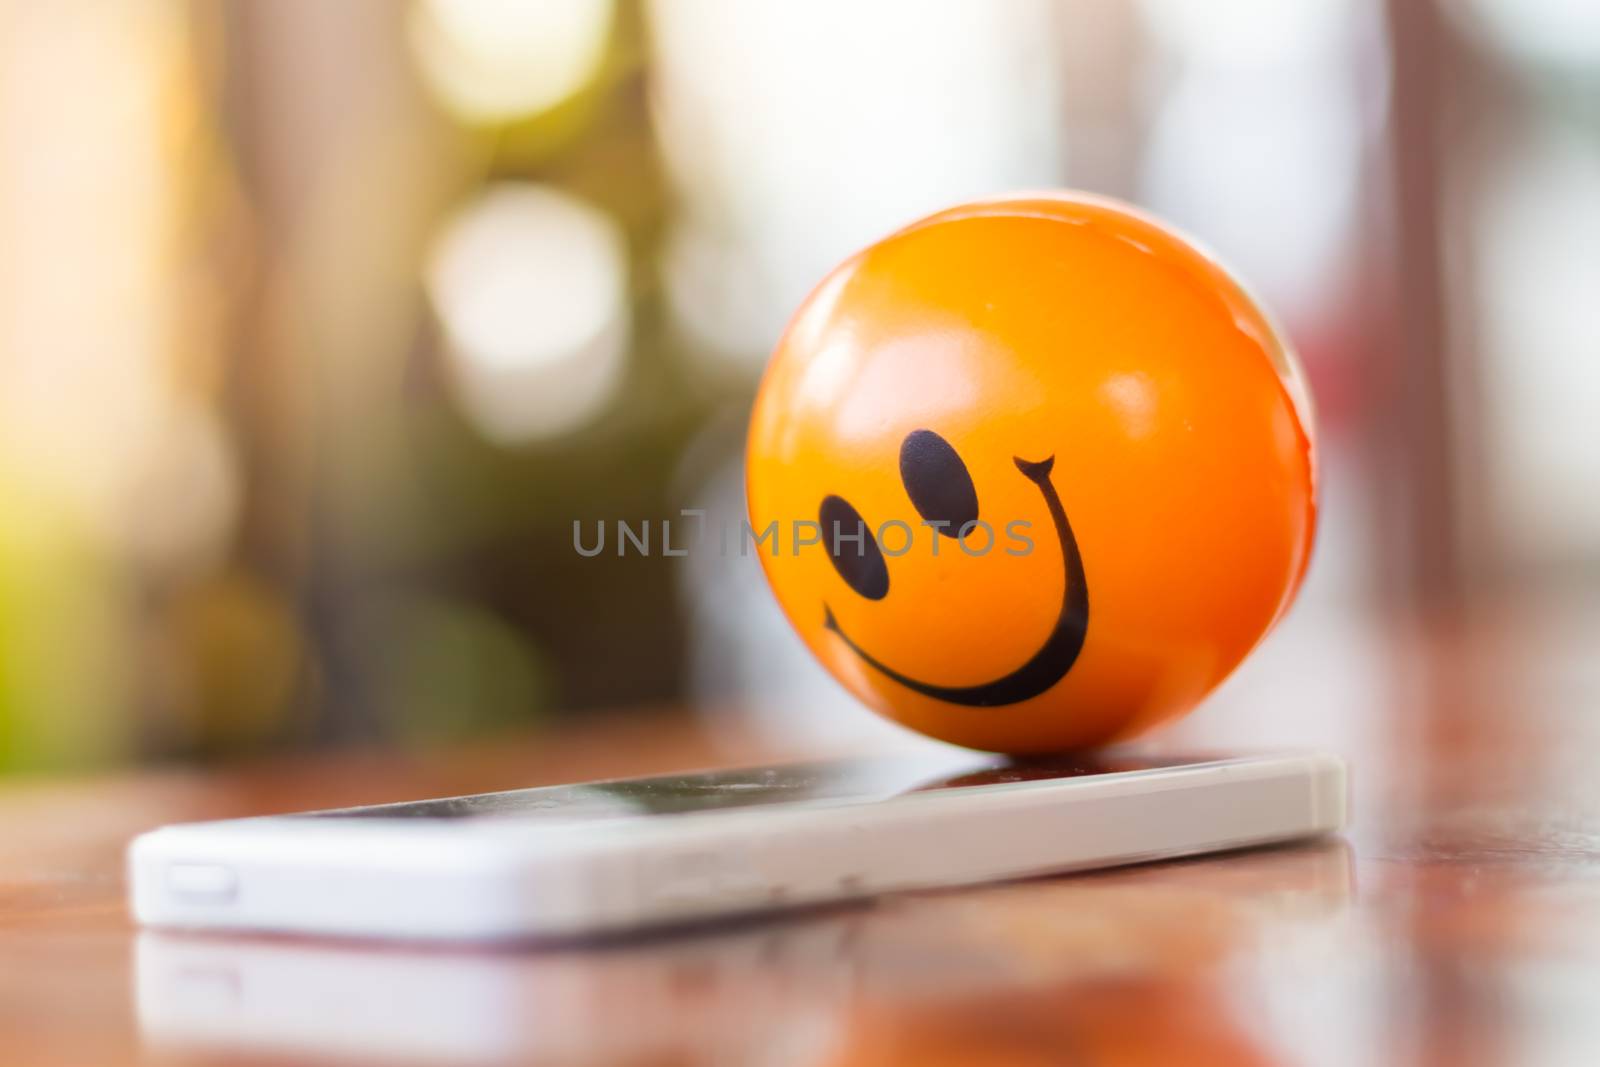 smiling ball with moblie  phone by nitimongkolchai